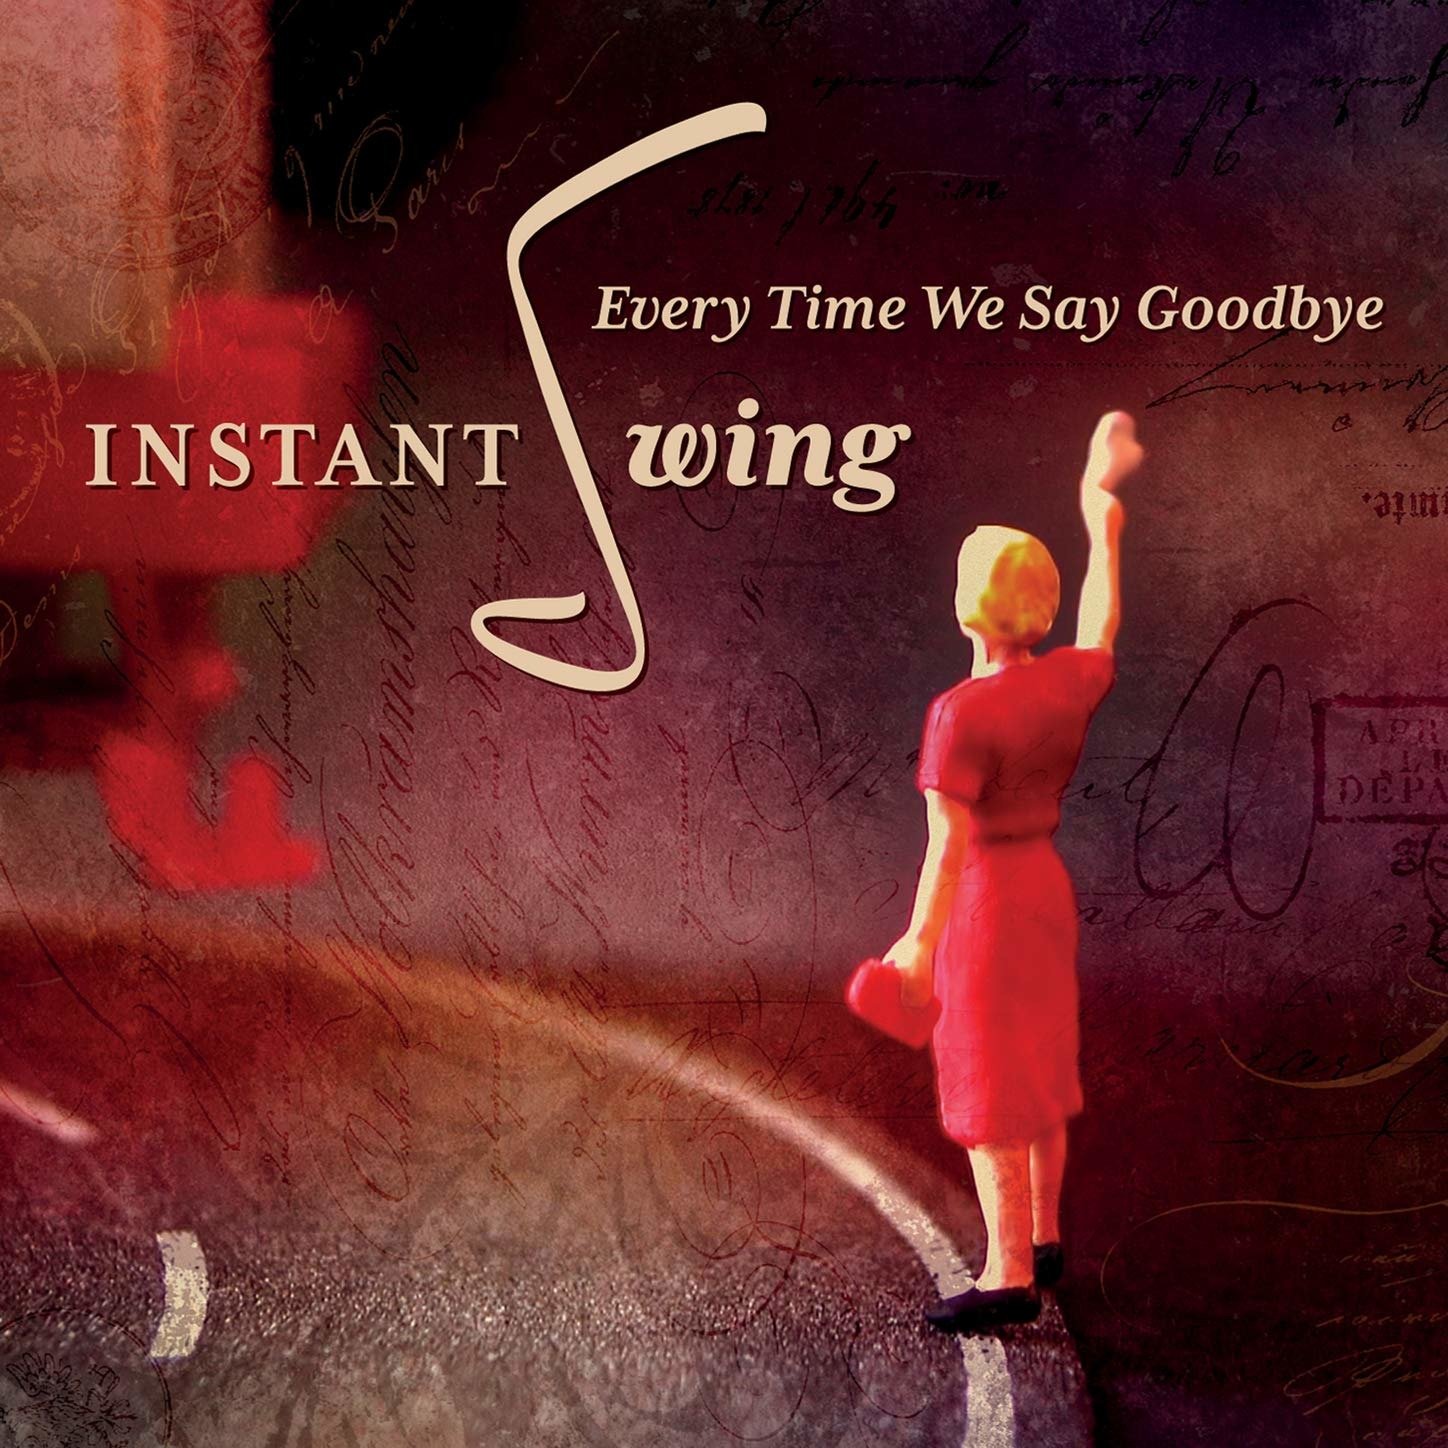 CD Shop - INSTANT SWING EVERY TIME WE SAY GOODBYE